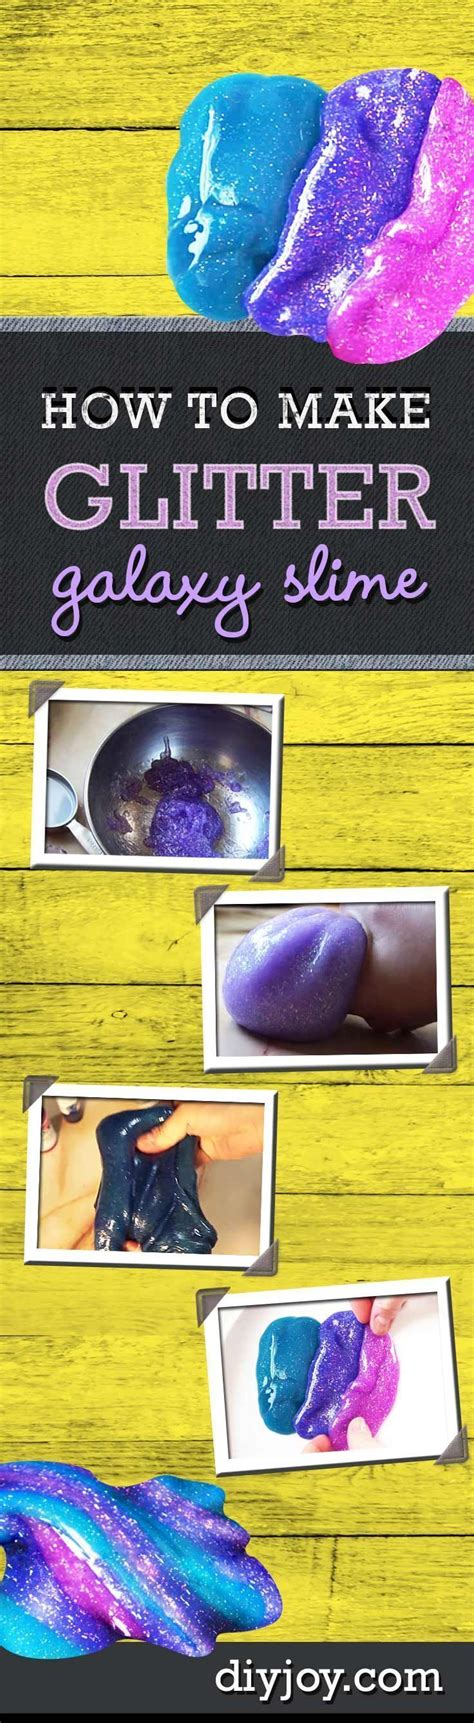 How To Make Glitter Galaxy Slime Crafts For Kids To Make